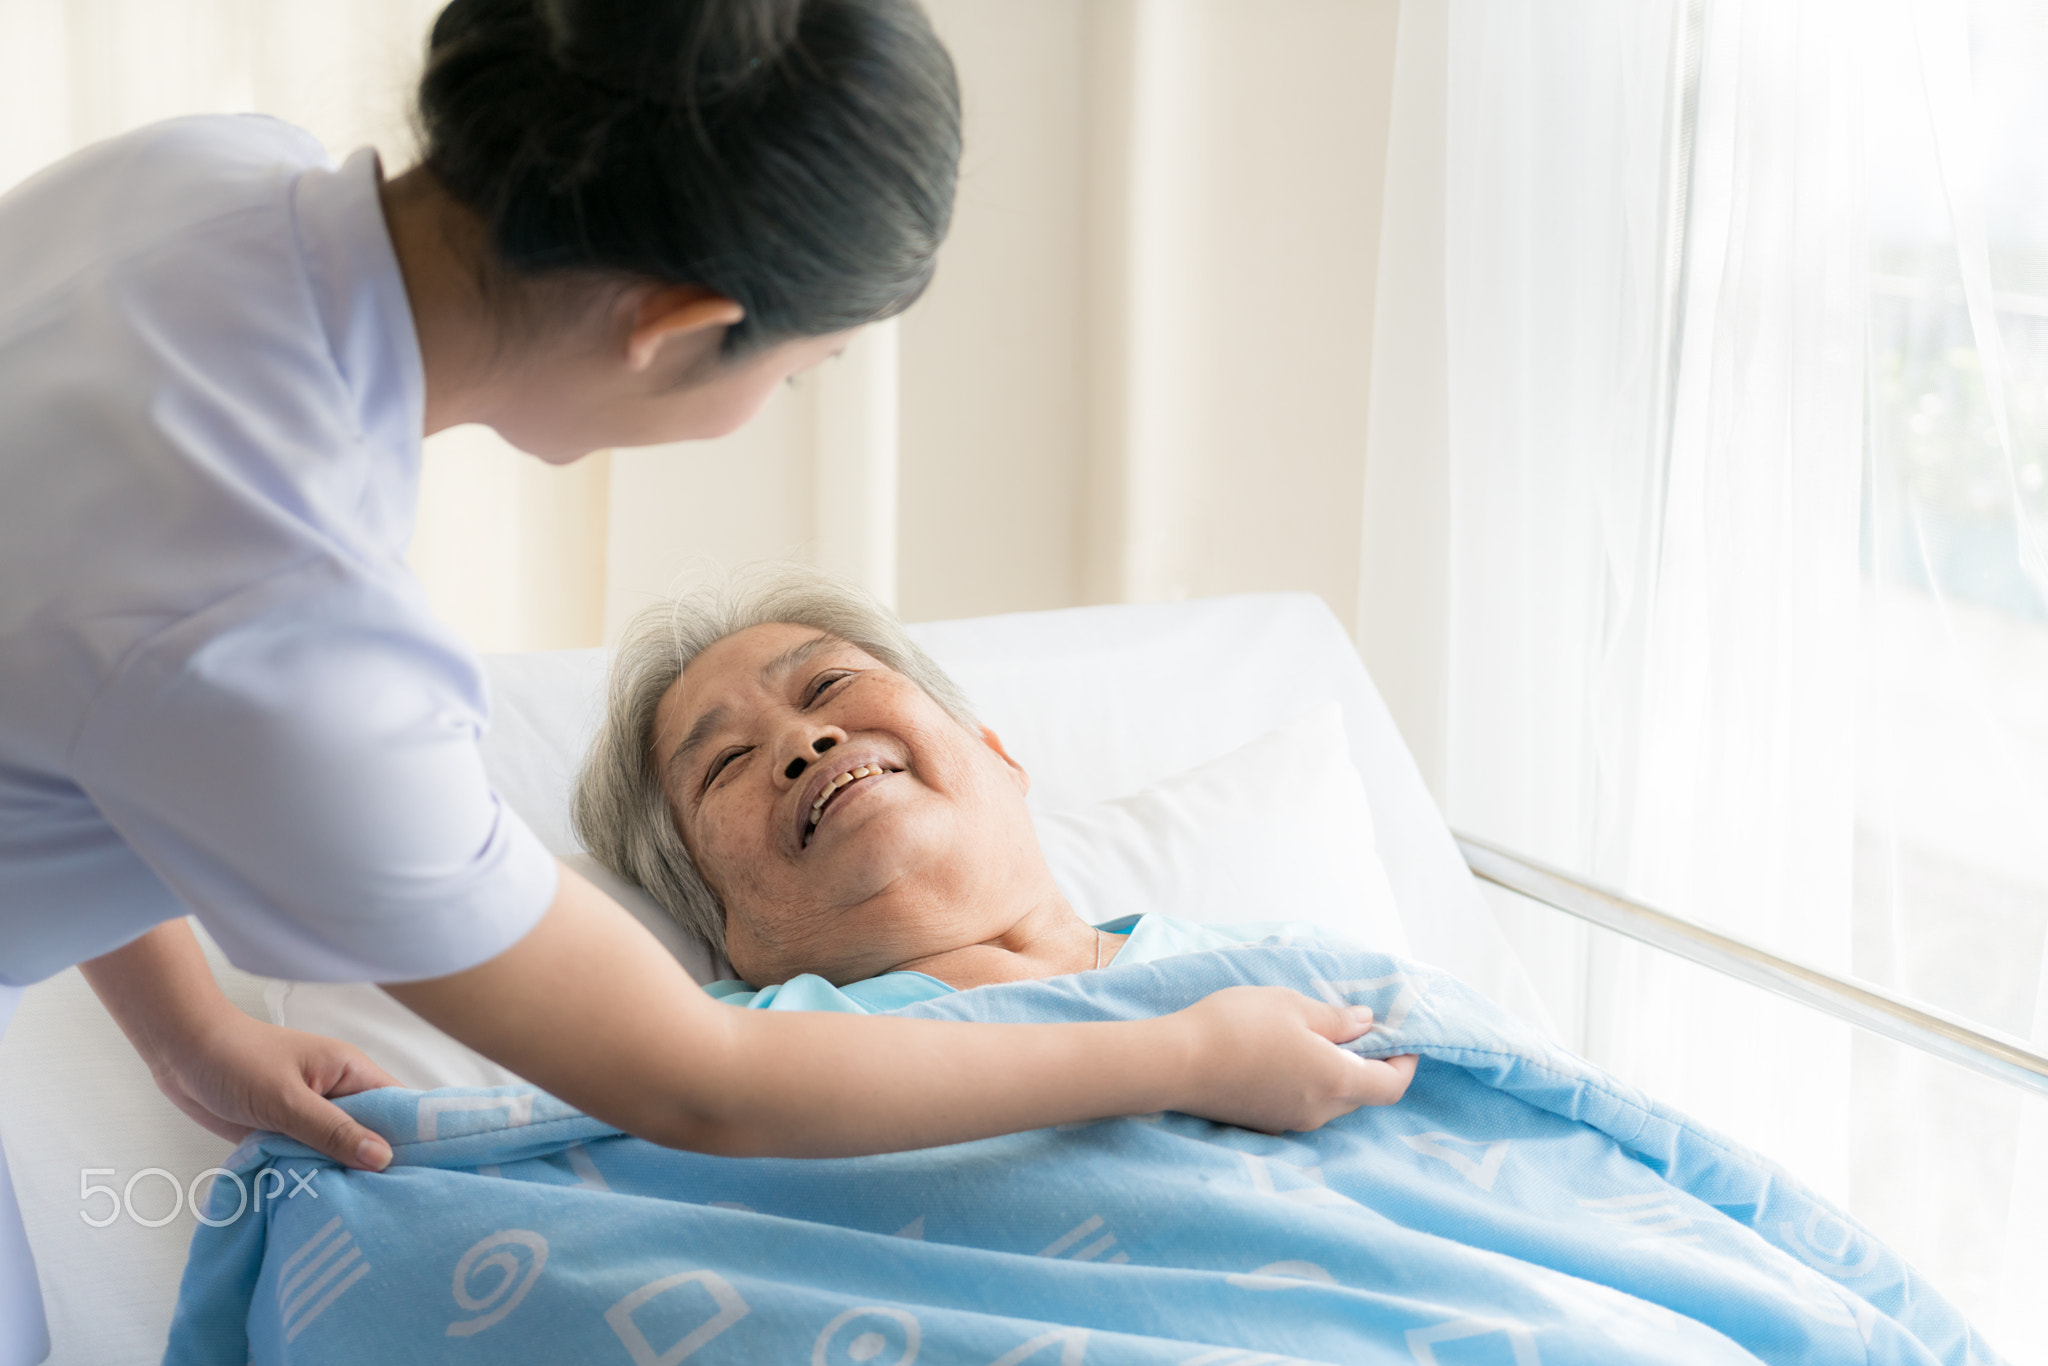 Asian nurse in elderly care cover her with a blanket for the eld